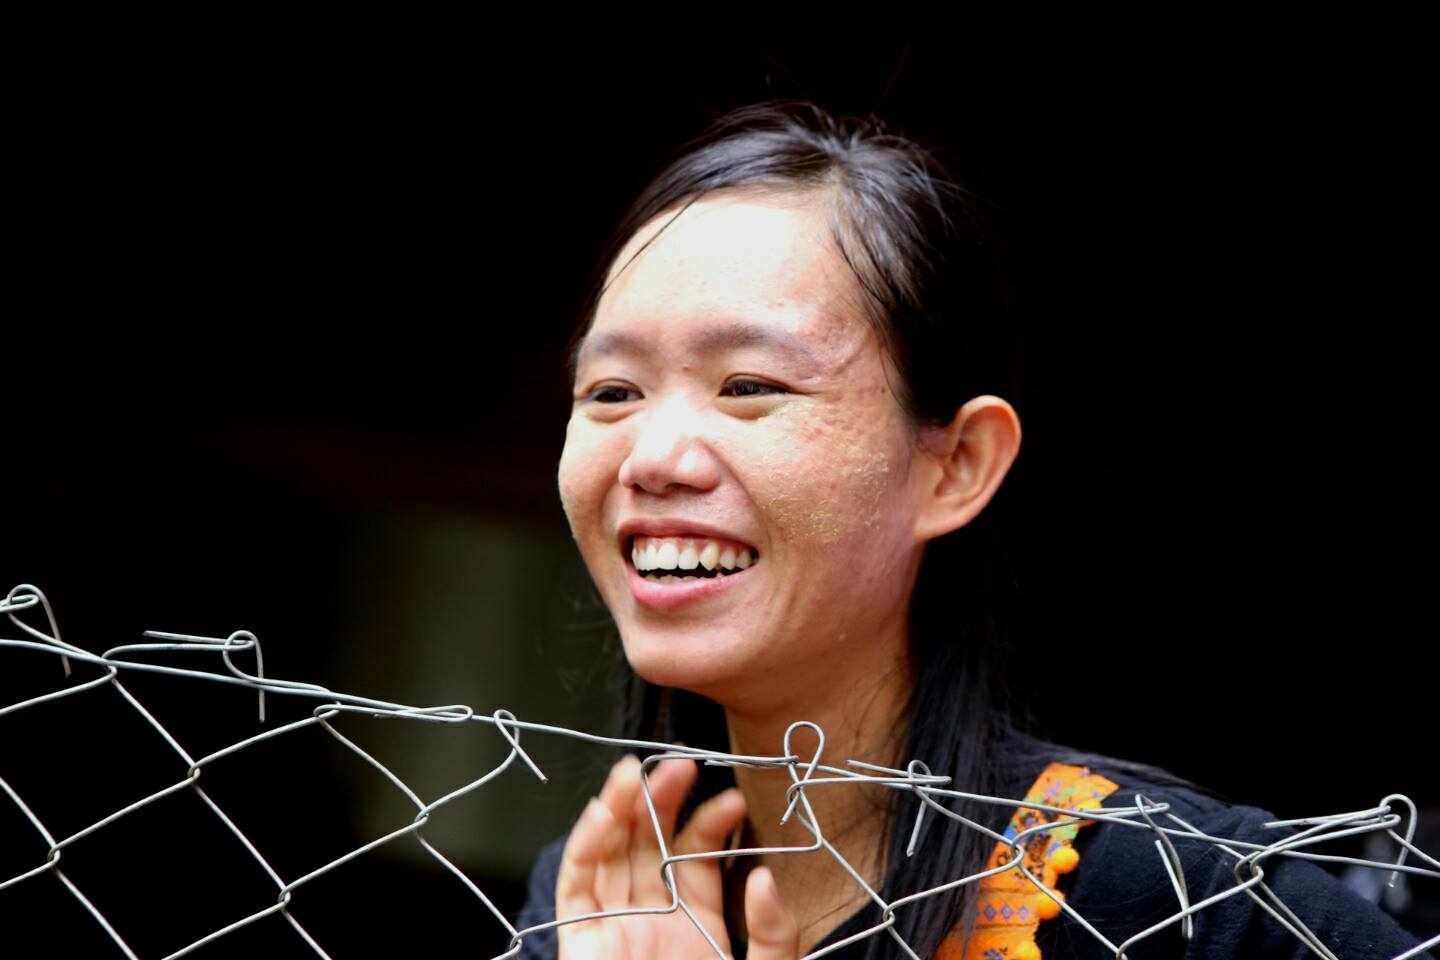 Phyoe Phyoe Aung at court hearings in May 2015. Credit: Private.